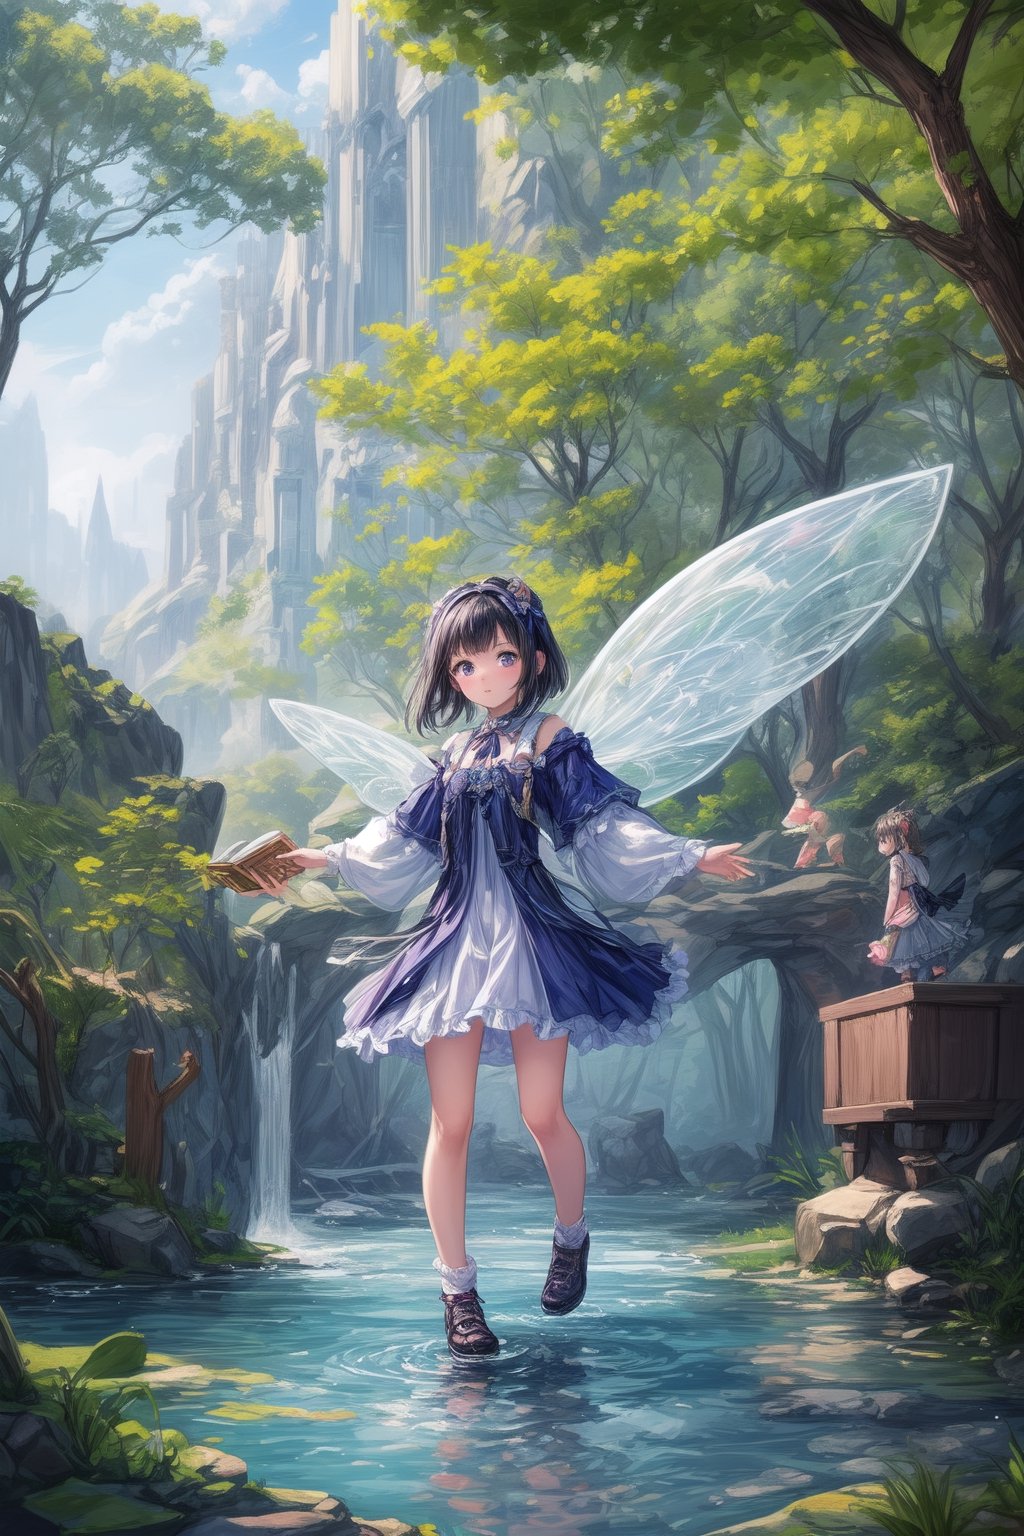 In a hidden forest, a river runs through the trees, reflecting the light of a fairy's wings as she guides a young girl through a magical book filled with wonder and adventure., girl